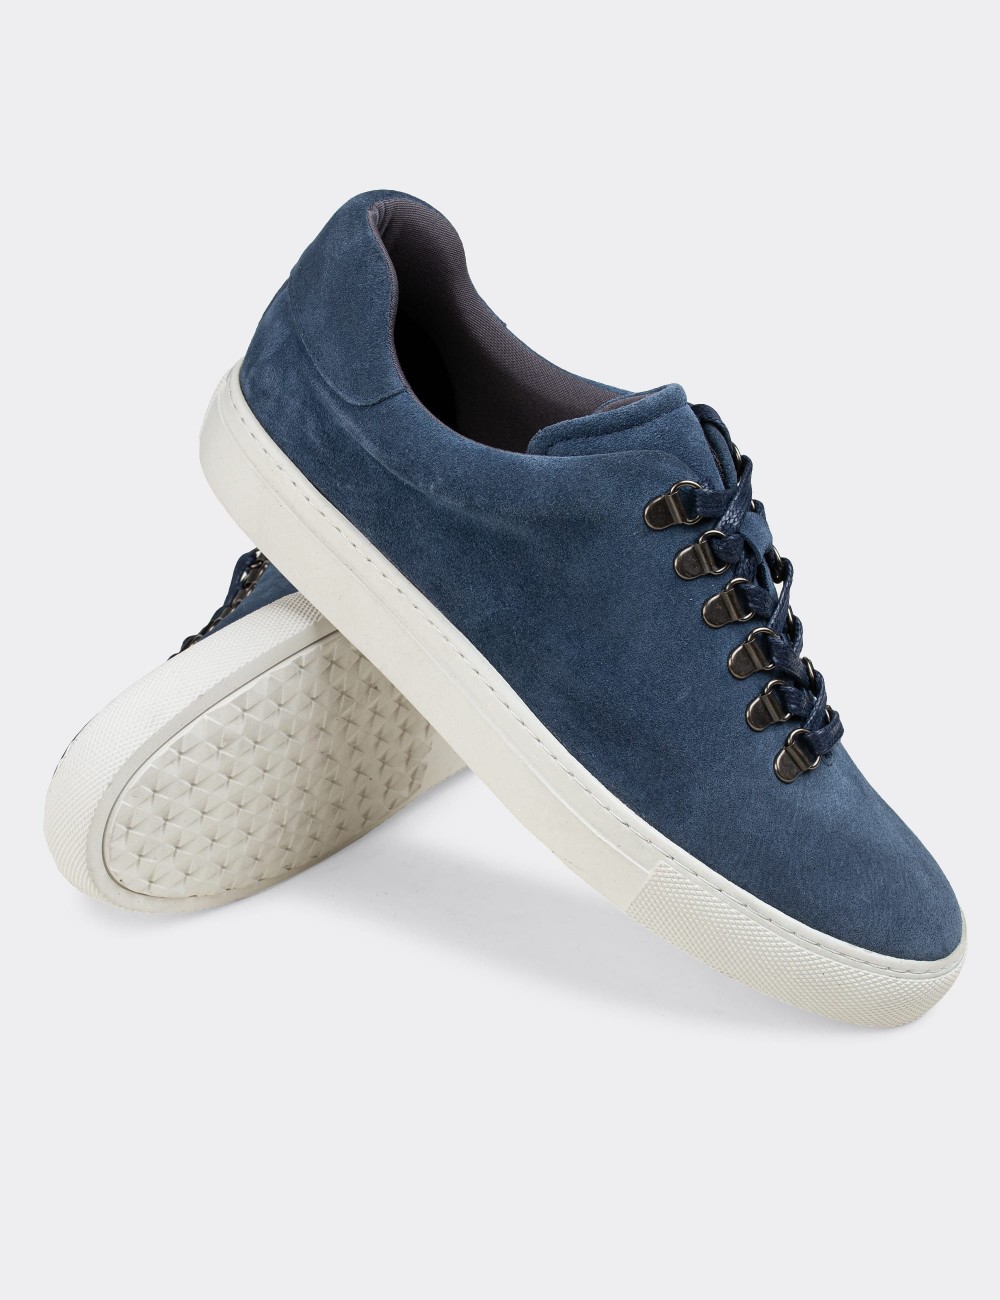 Blue Suede Leather Sneakers - 01835MMVIC01